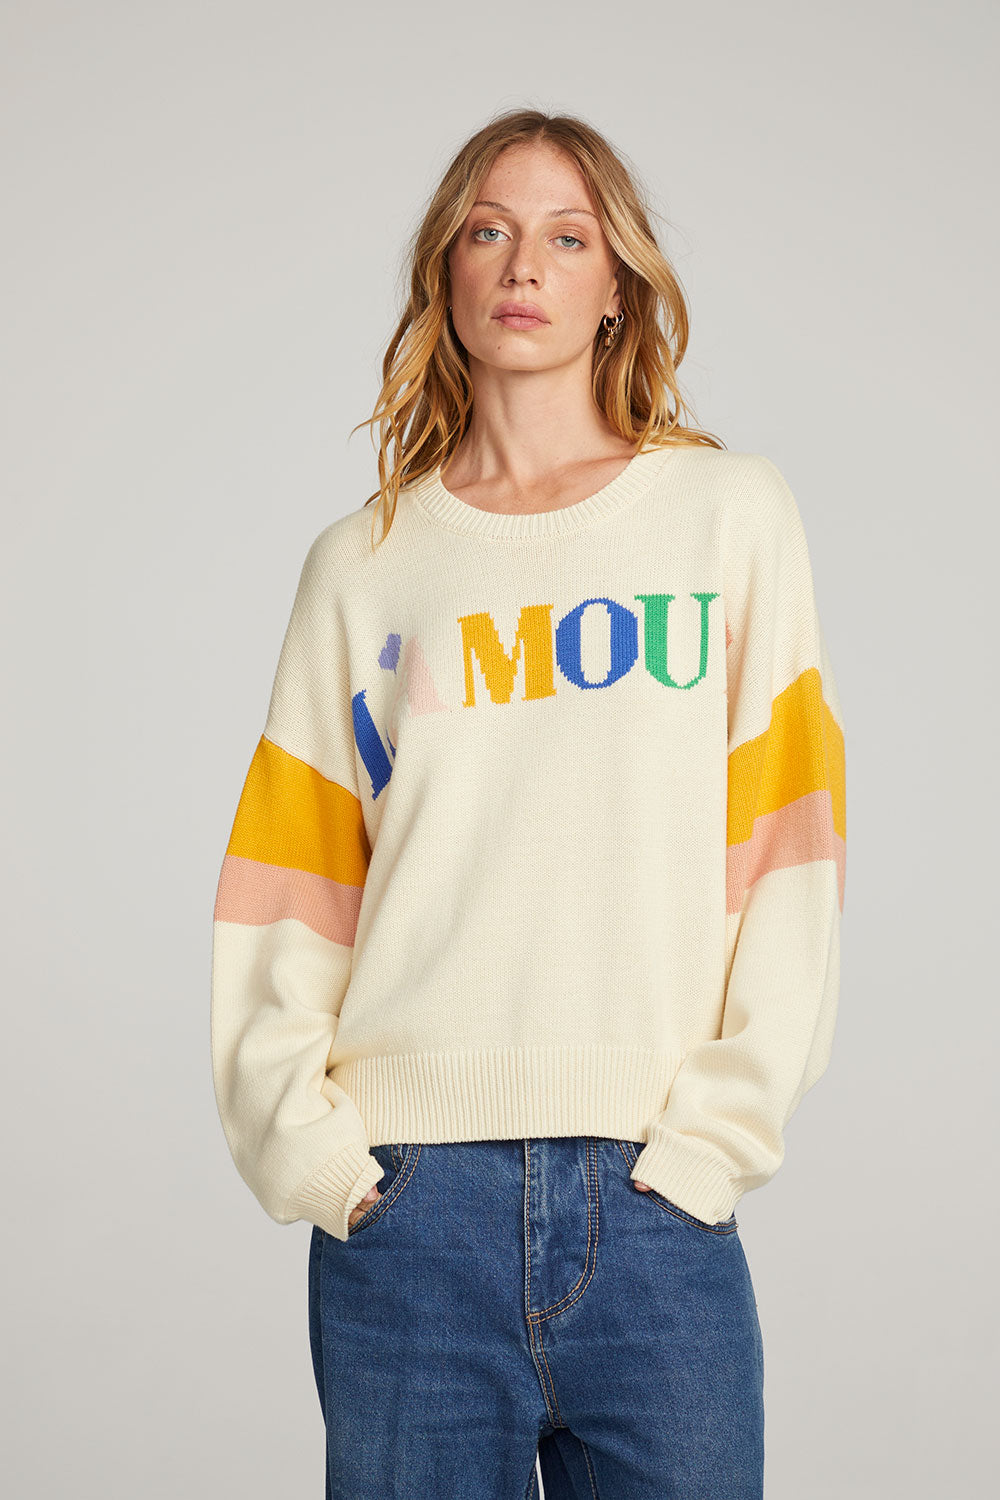 L'amour Sweater WOMENS chaserbrand